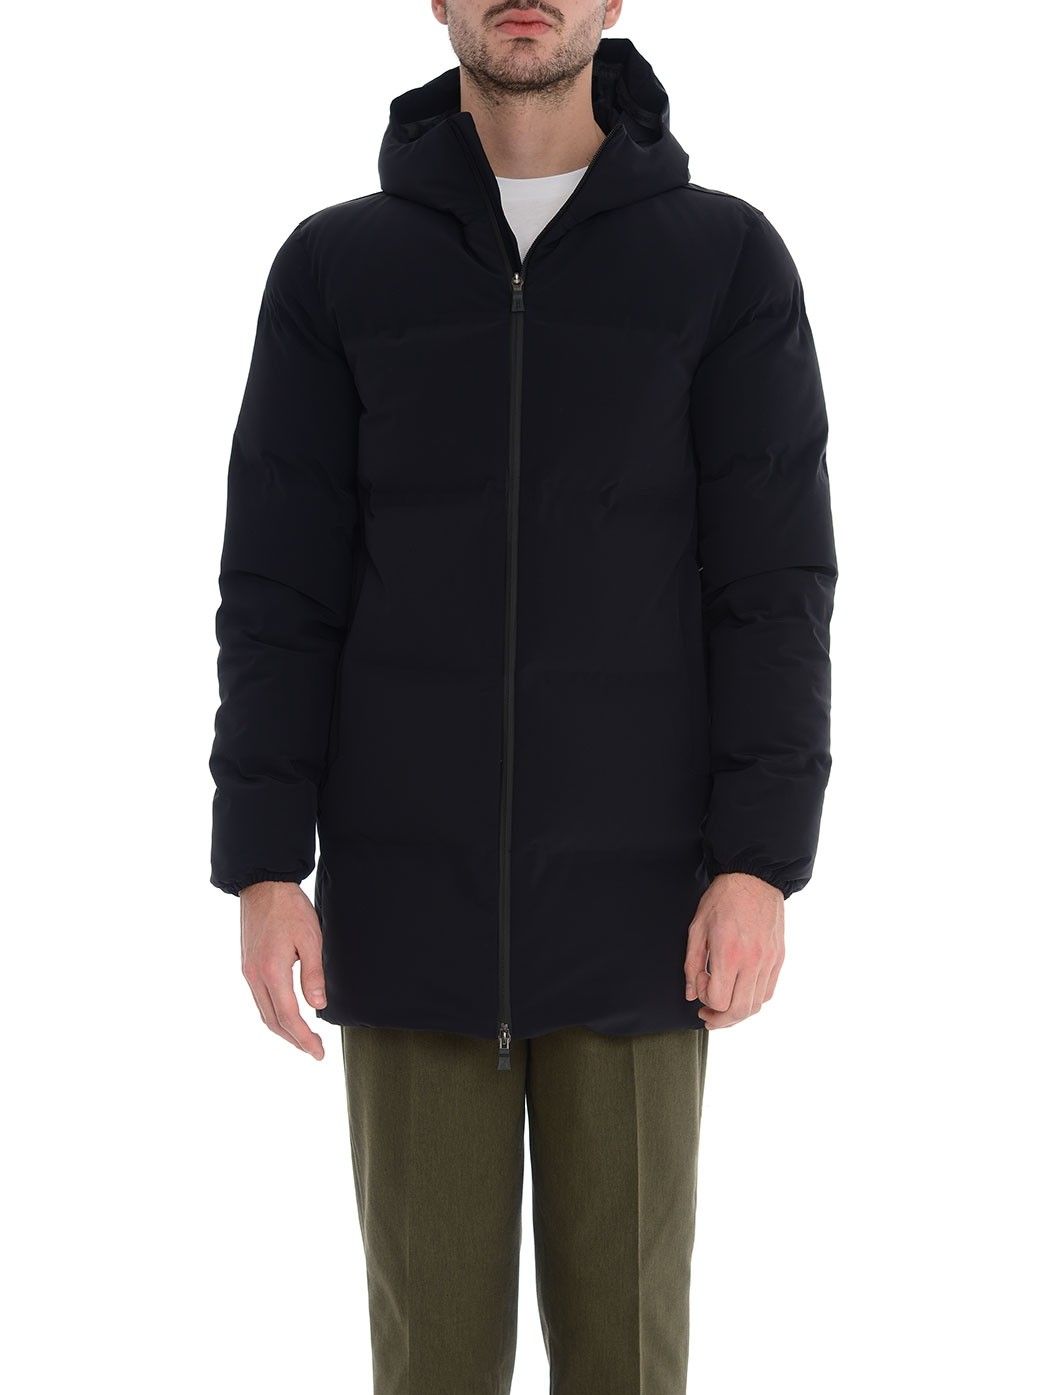  MAN COLLECTION,FALL WINTER,CHURCH'S,MONCLER,MONCLER GRENOBLE,HERNO,WOOLRICH,MSGM,NEIL BARRETT,STONE ISLAND,BLUNDSTONE  HERNO PI00236UL-12590S